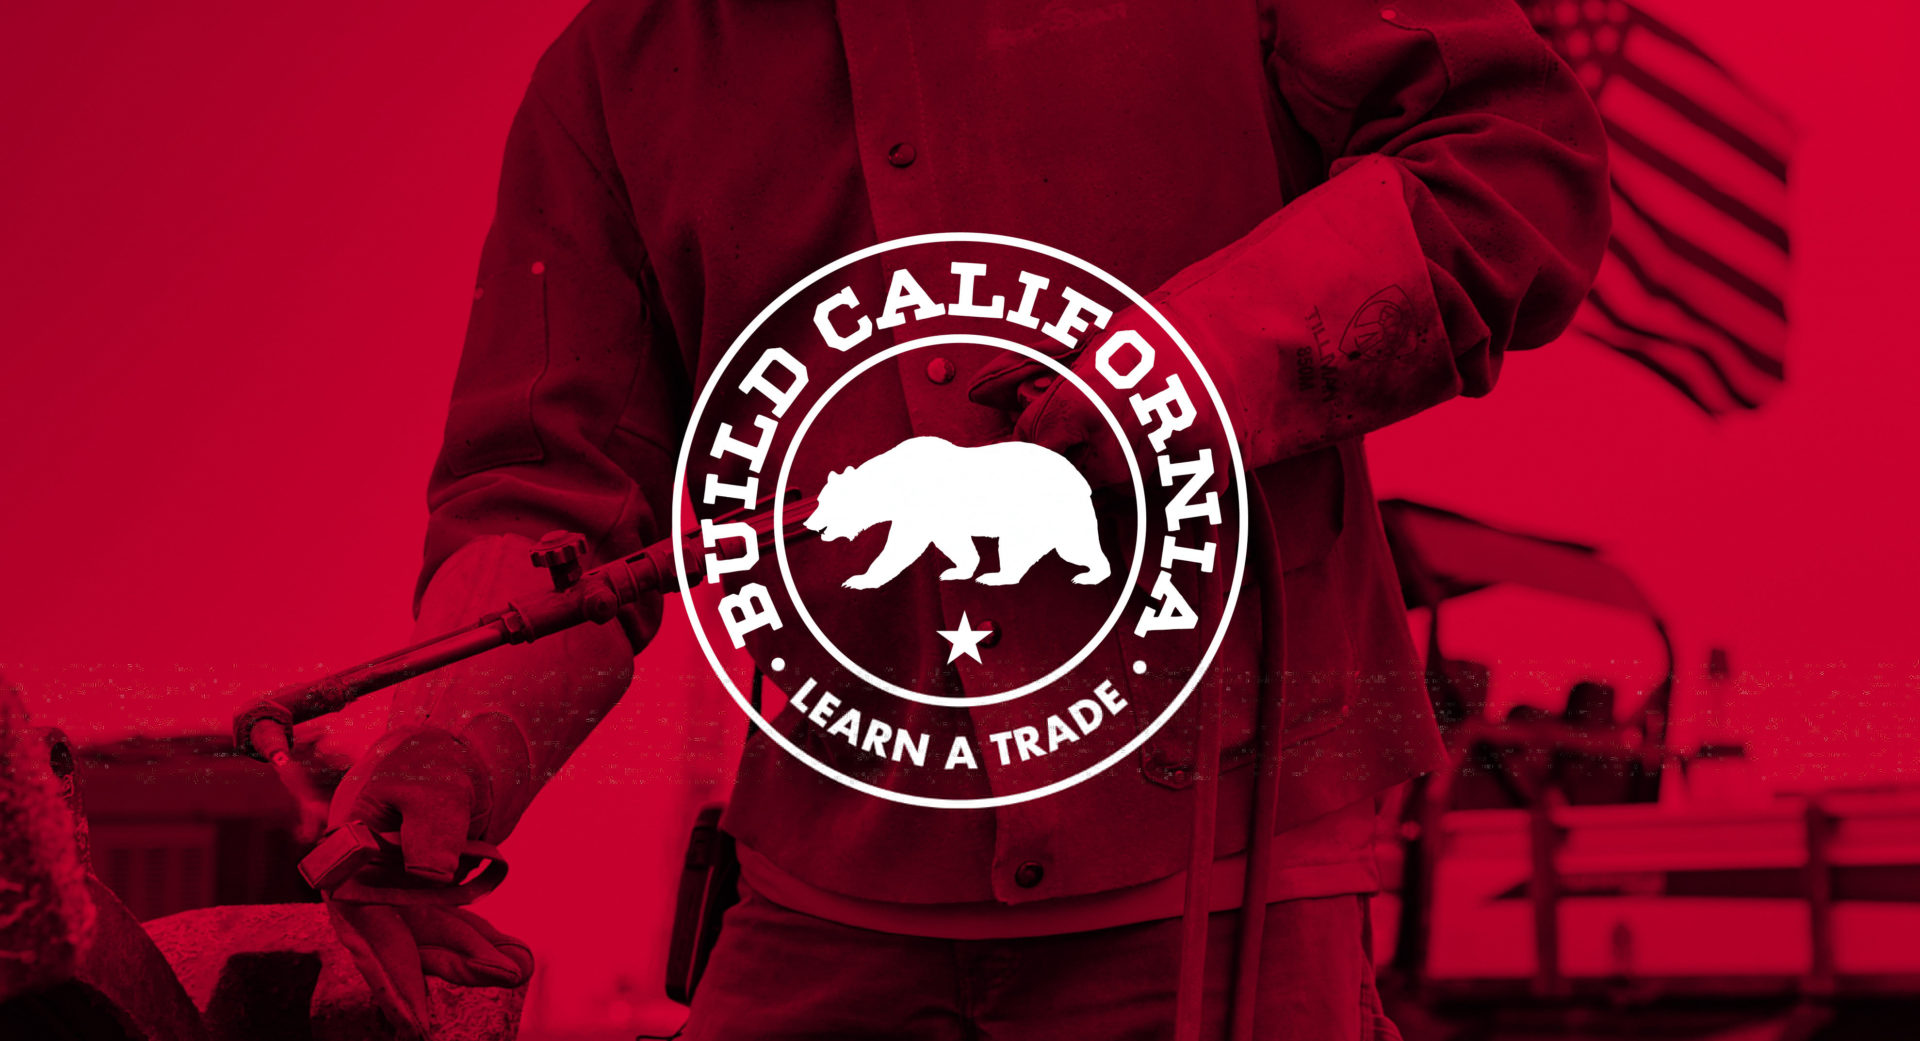 Build California seal logo overlaid on an image of a welder